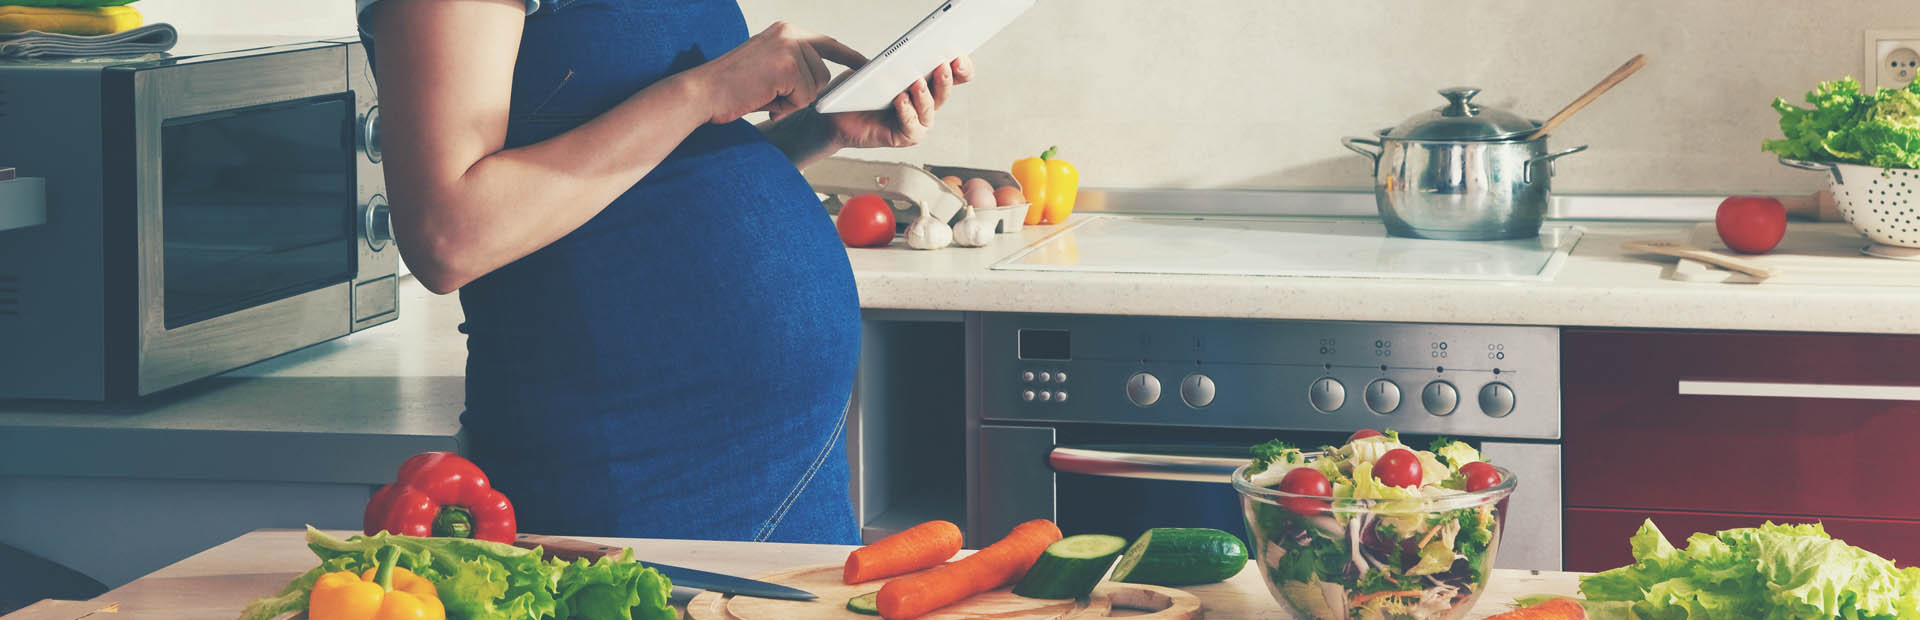 Pregnant woman at kitchen counter with various fruit and vegetables